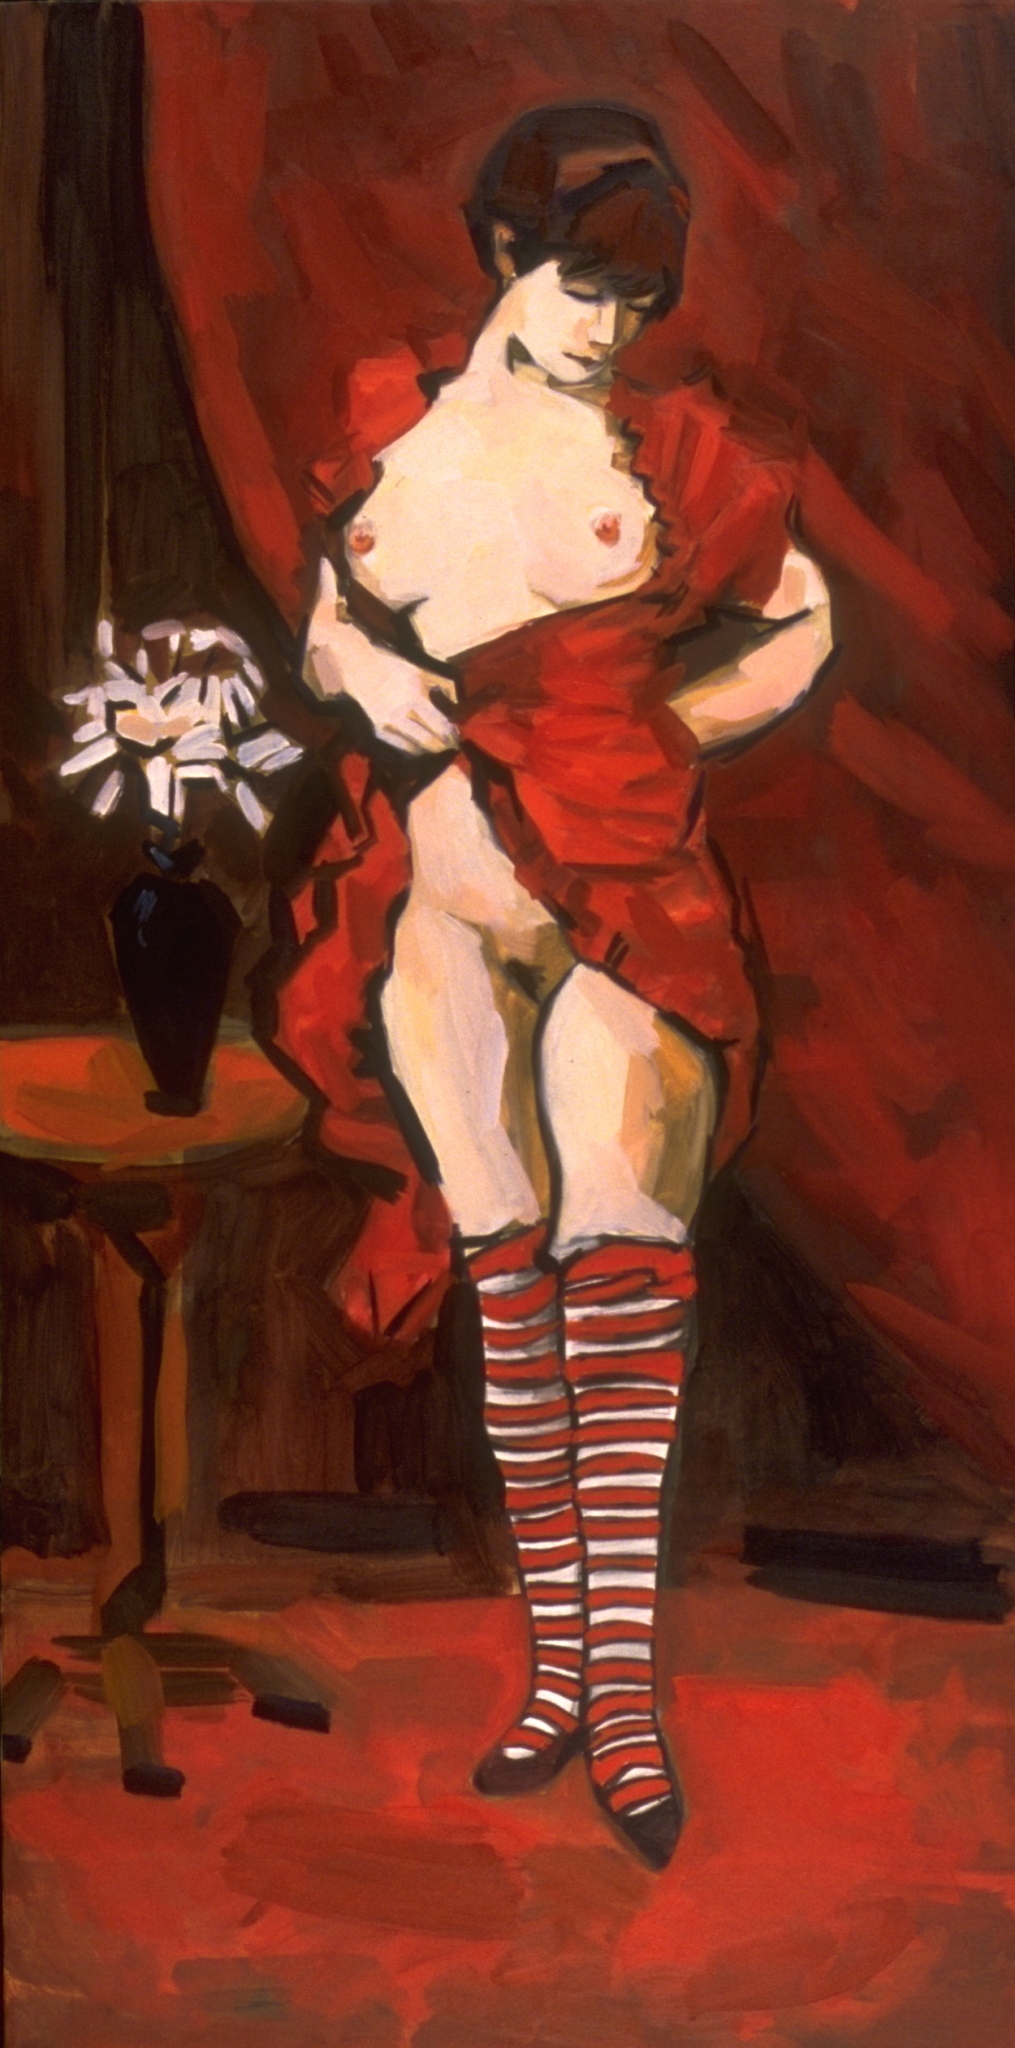 "Stockings" by Clifford Bailey Fine Art